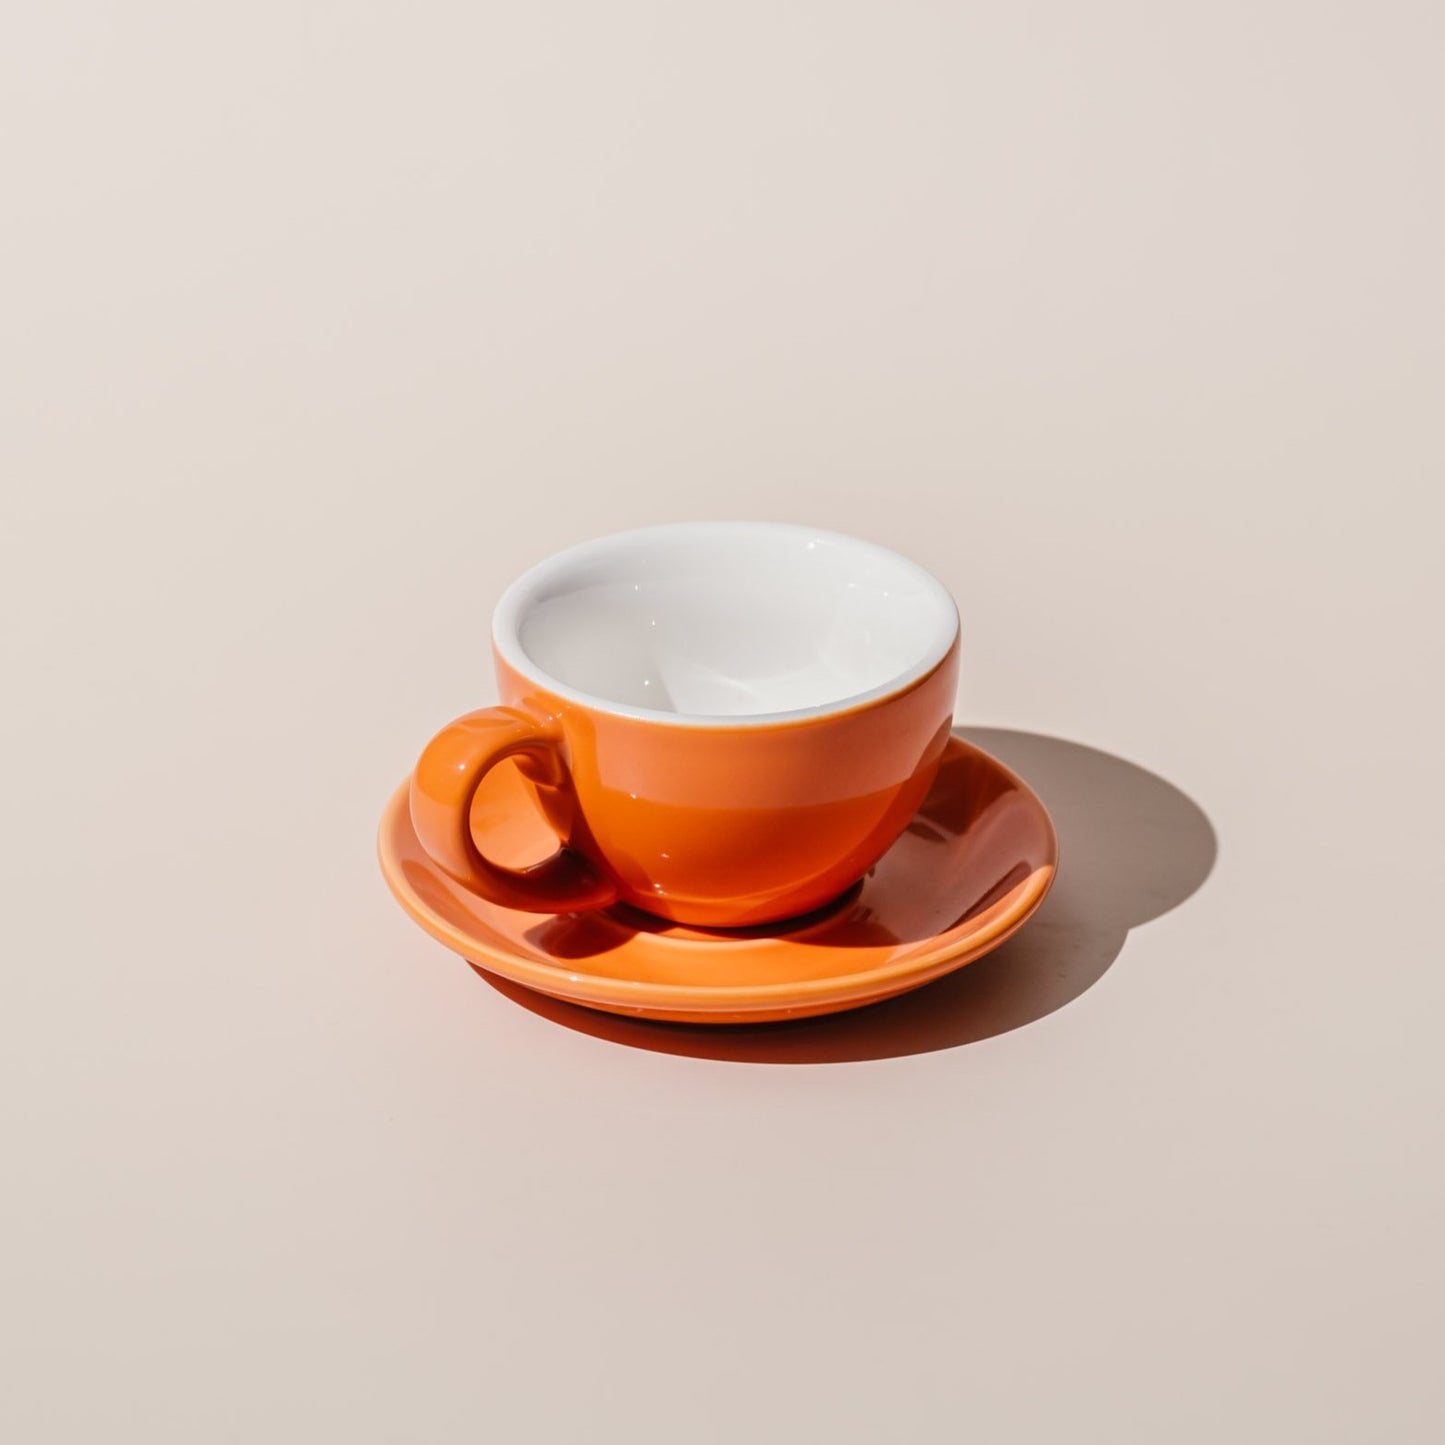 150ml Flat White Egg Cup & Saucer